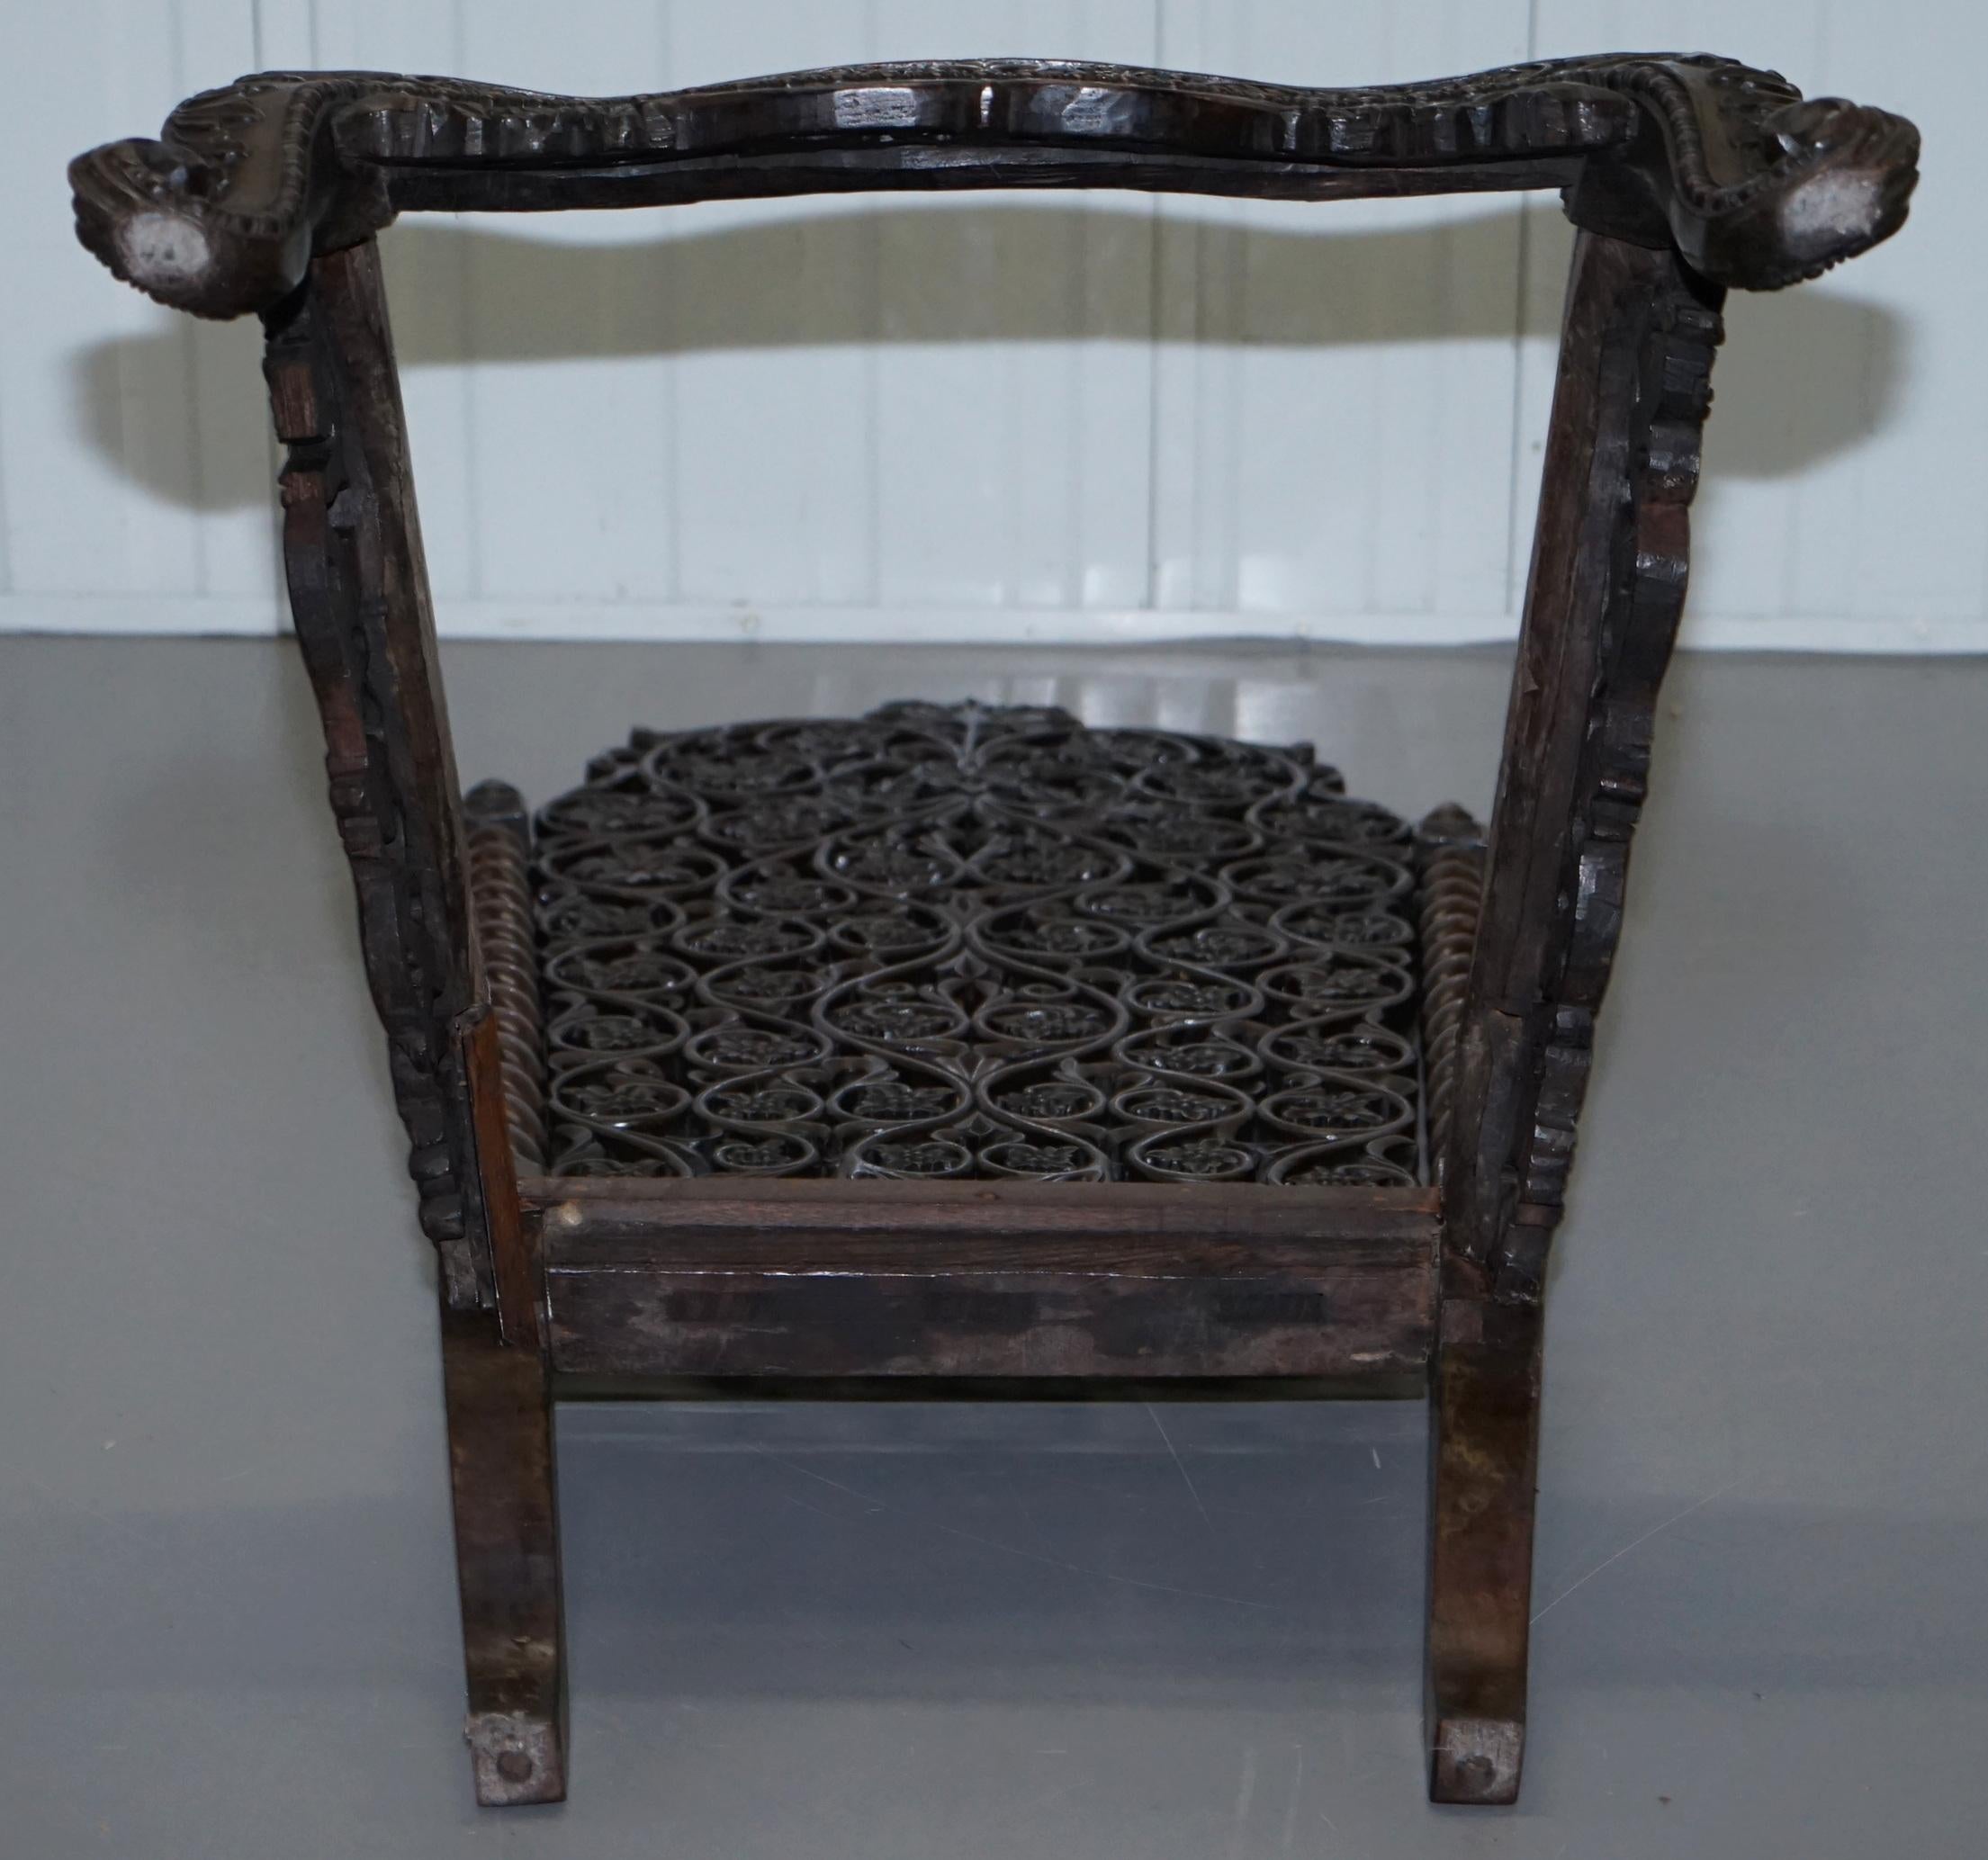 Rare circa 1880 Burmese Solid Hardwood Hand Carved Floral Chair High Back Ornate For Sale 9